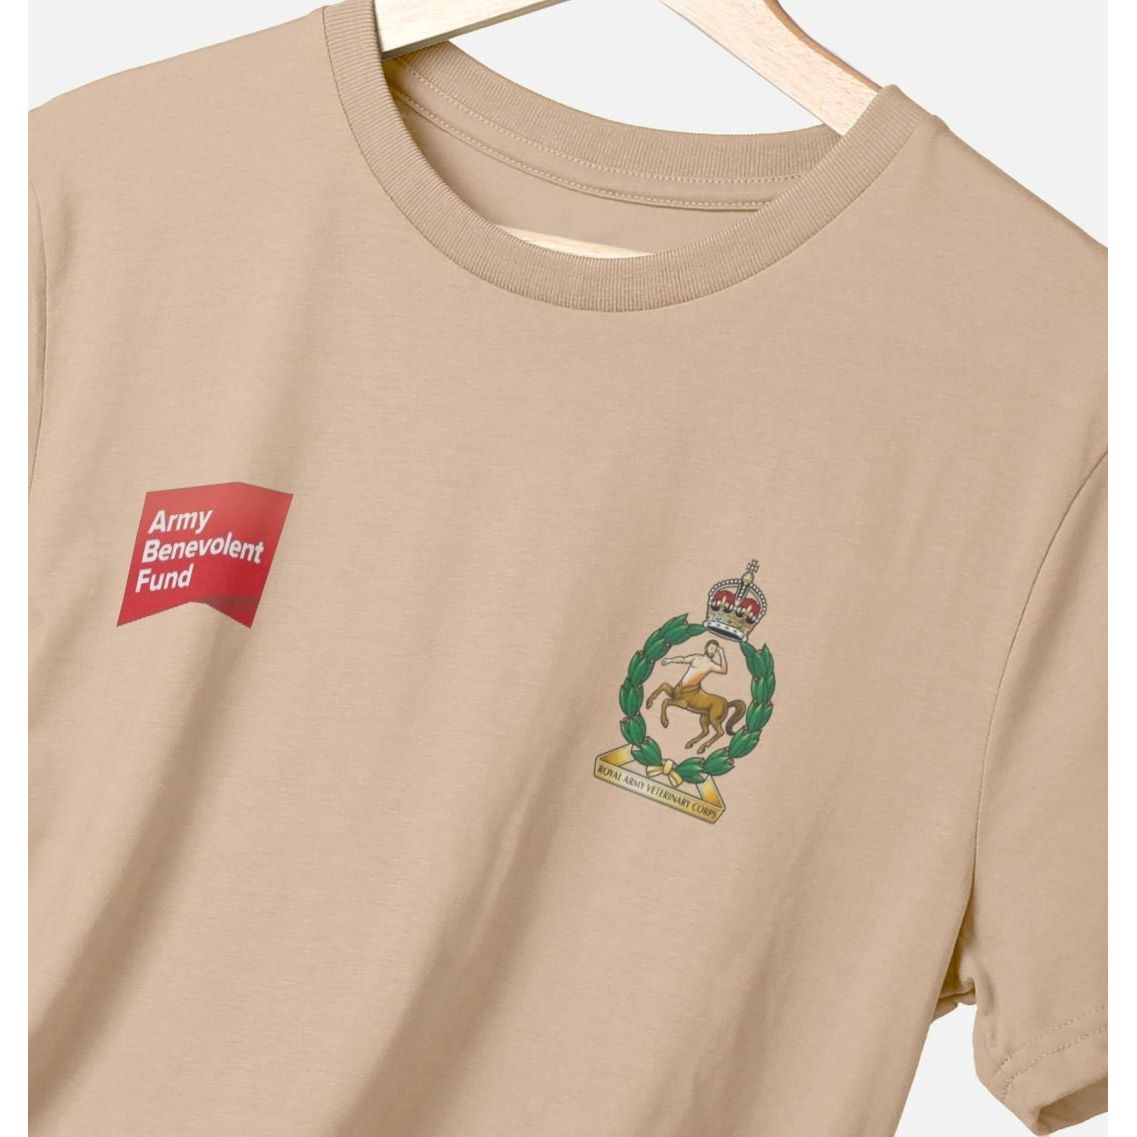 Royal Army Veterinary Corps Unisex T-shirt - Army Benevolent Fund